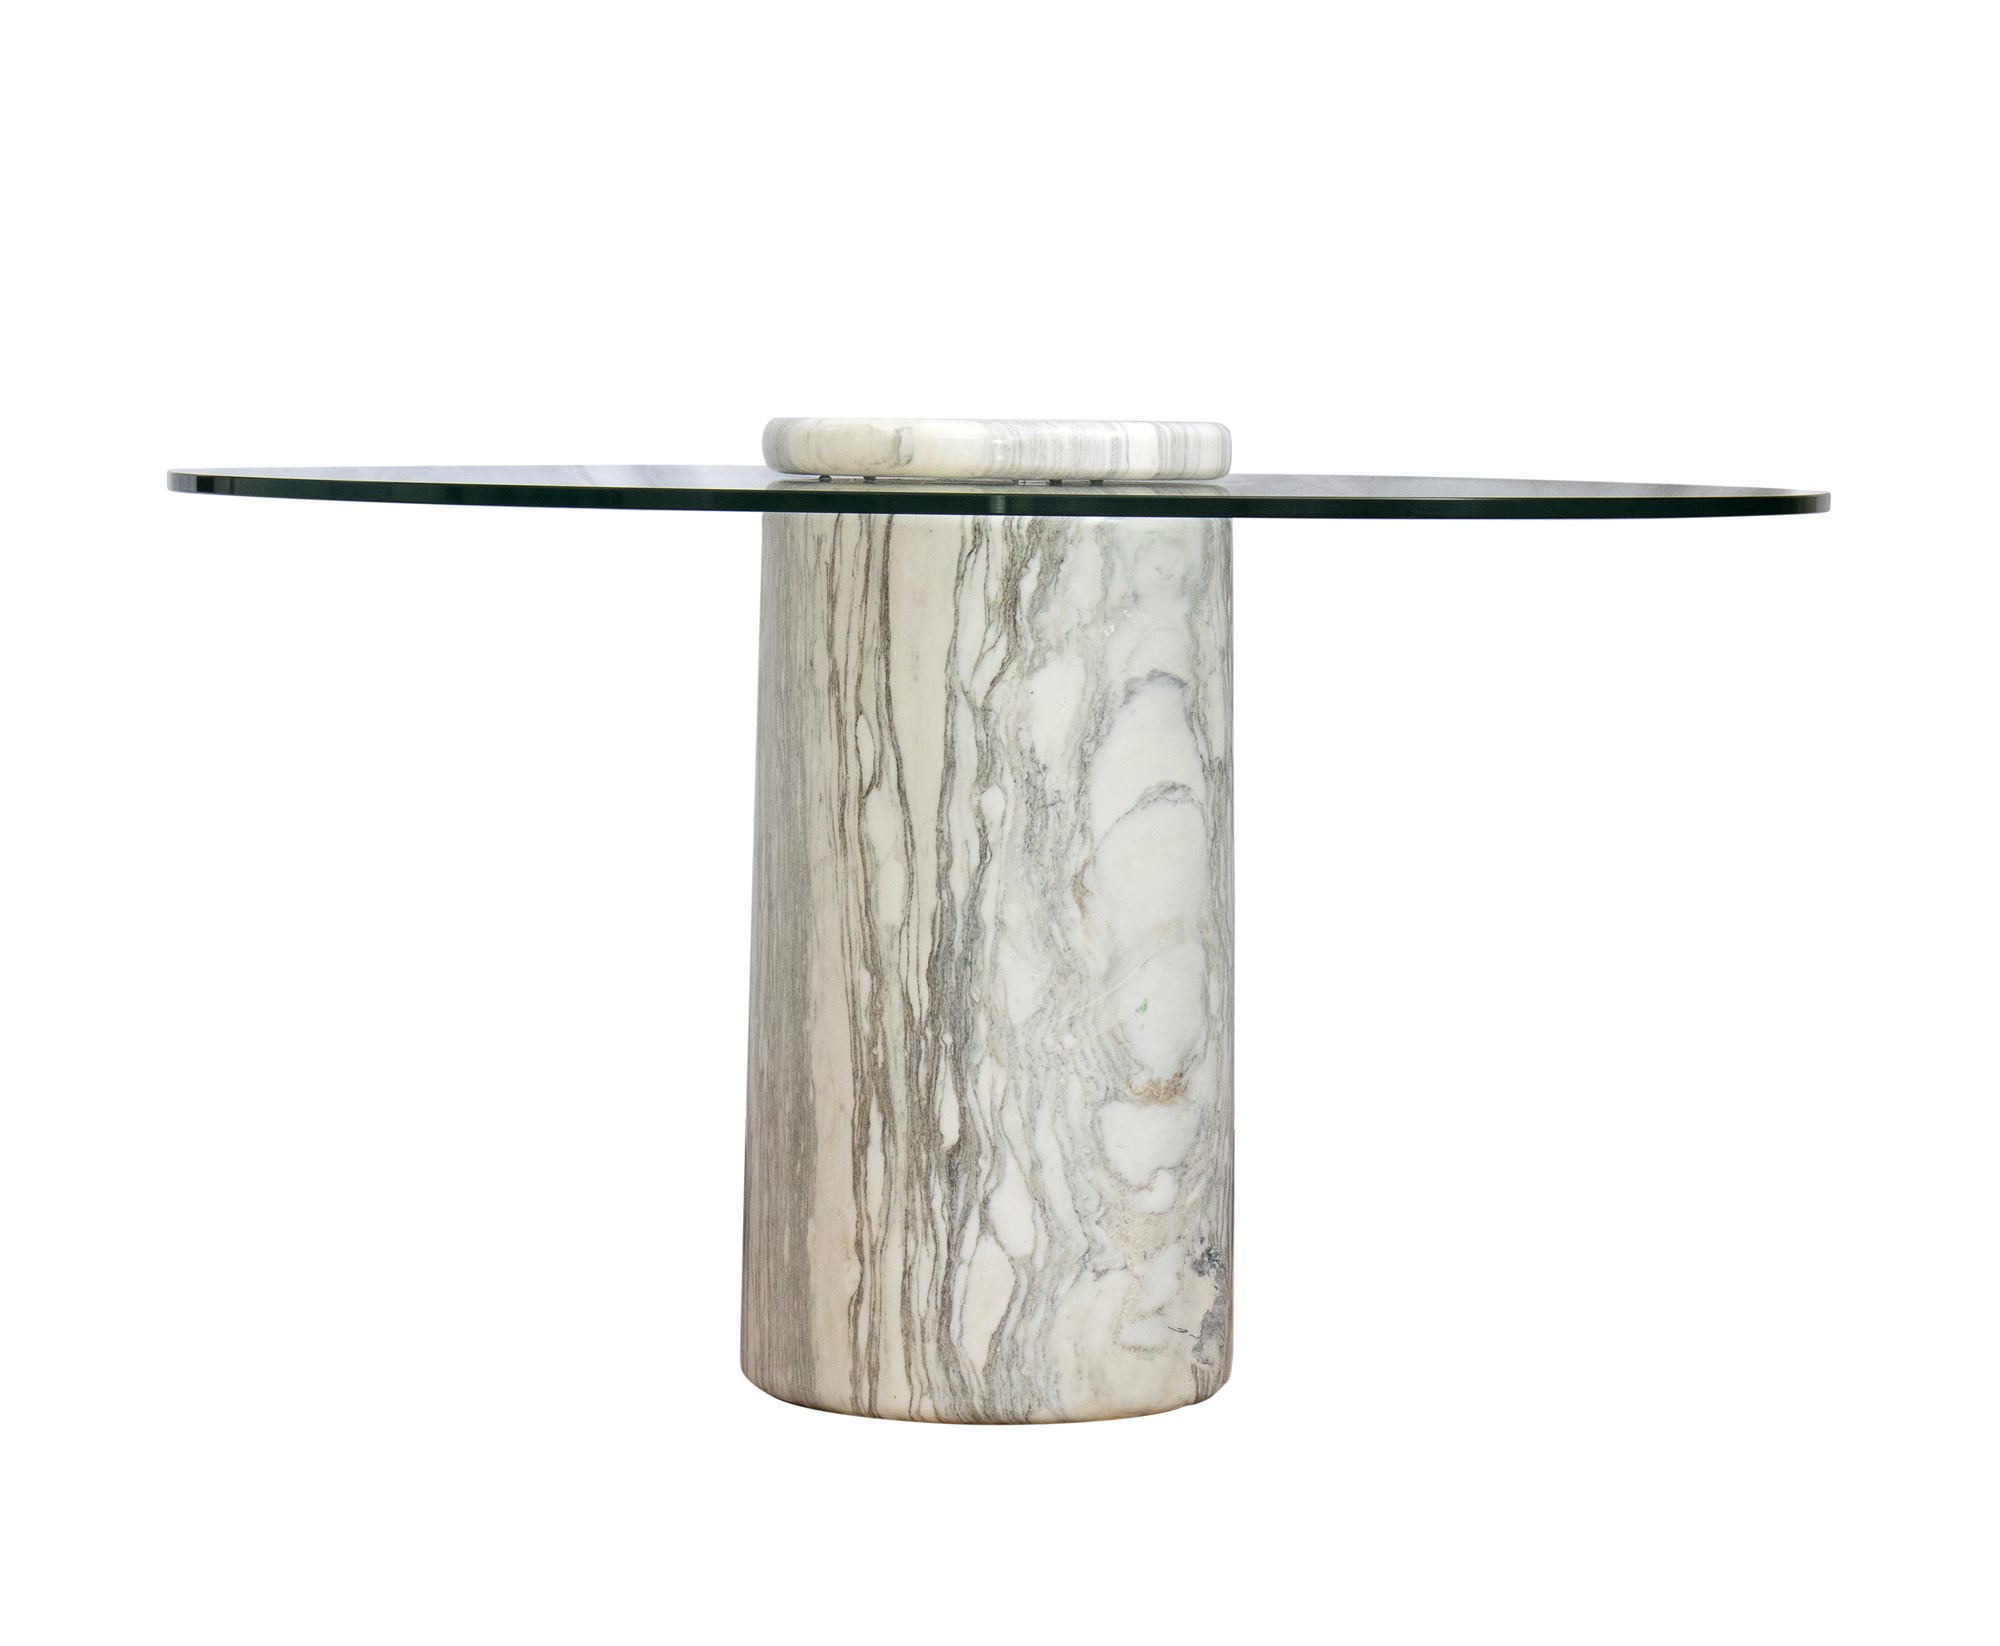 Angelo Mangiarotti Castore table in white marble and glass top - Image 4 of 7